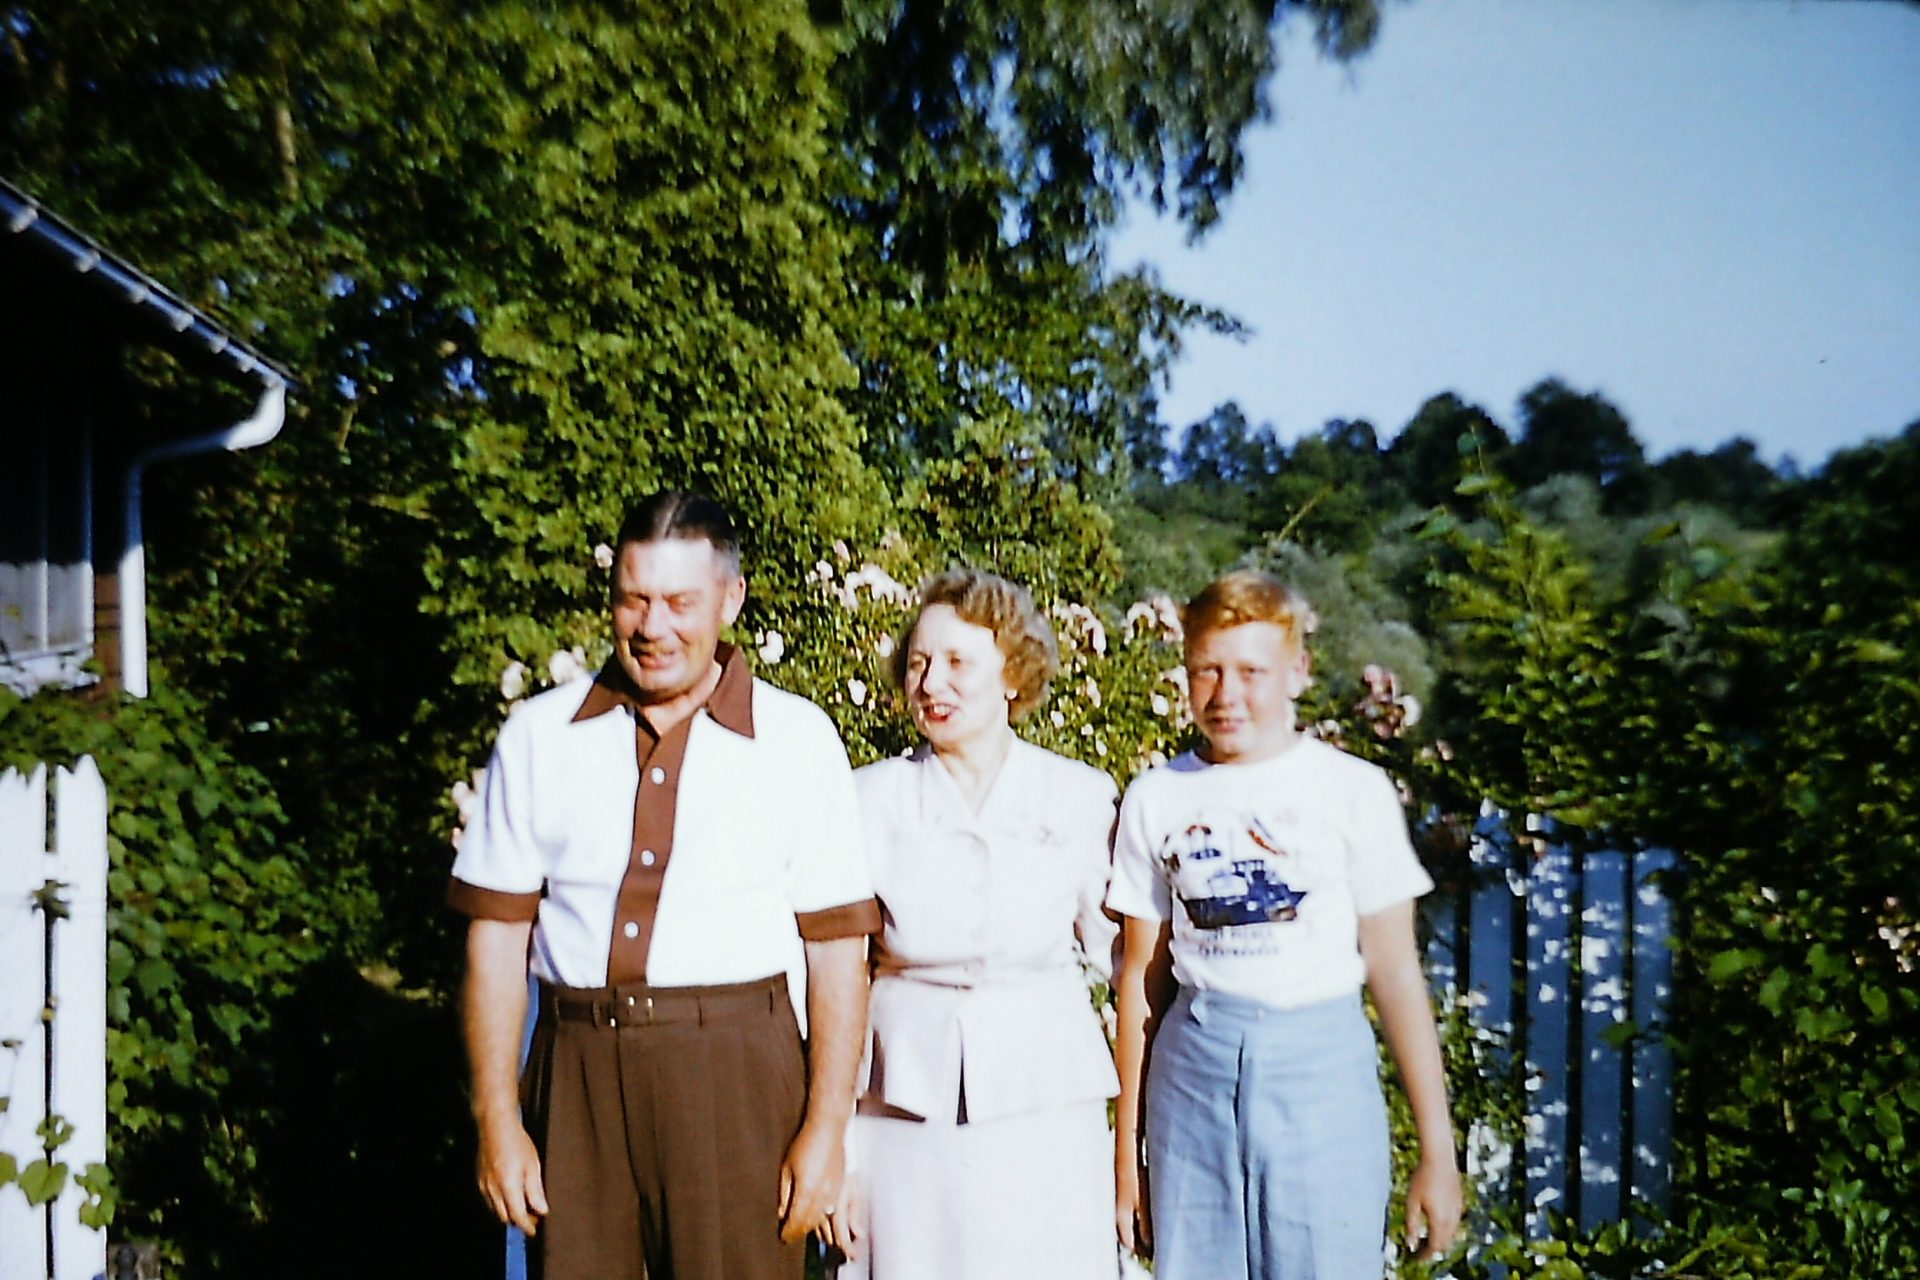 Elgin T. Upham, Henrietta Young Upham, and E. Tyler Upham.   July, 1954, Rochester, NY.<br />
Photo taken by Charles L. Schmidt.  Photo submitted by Charles P. Schmidt.